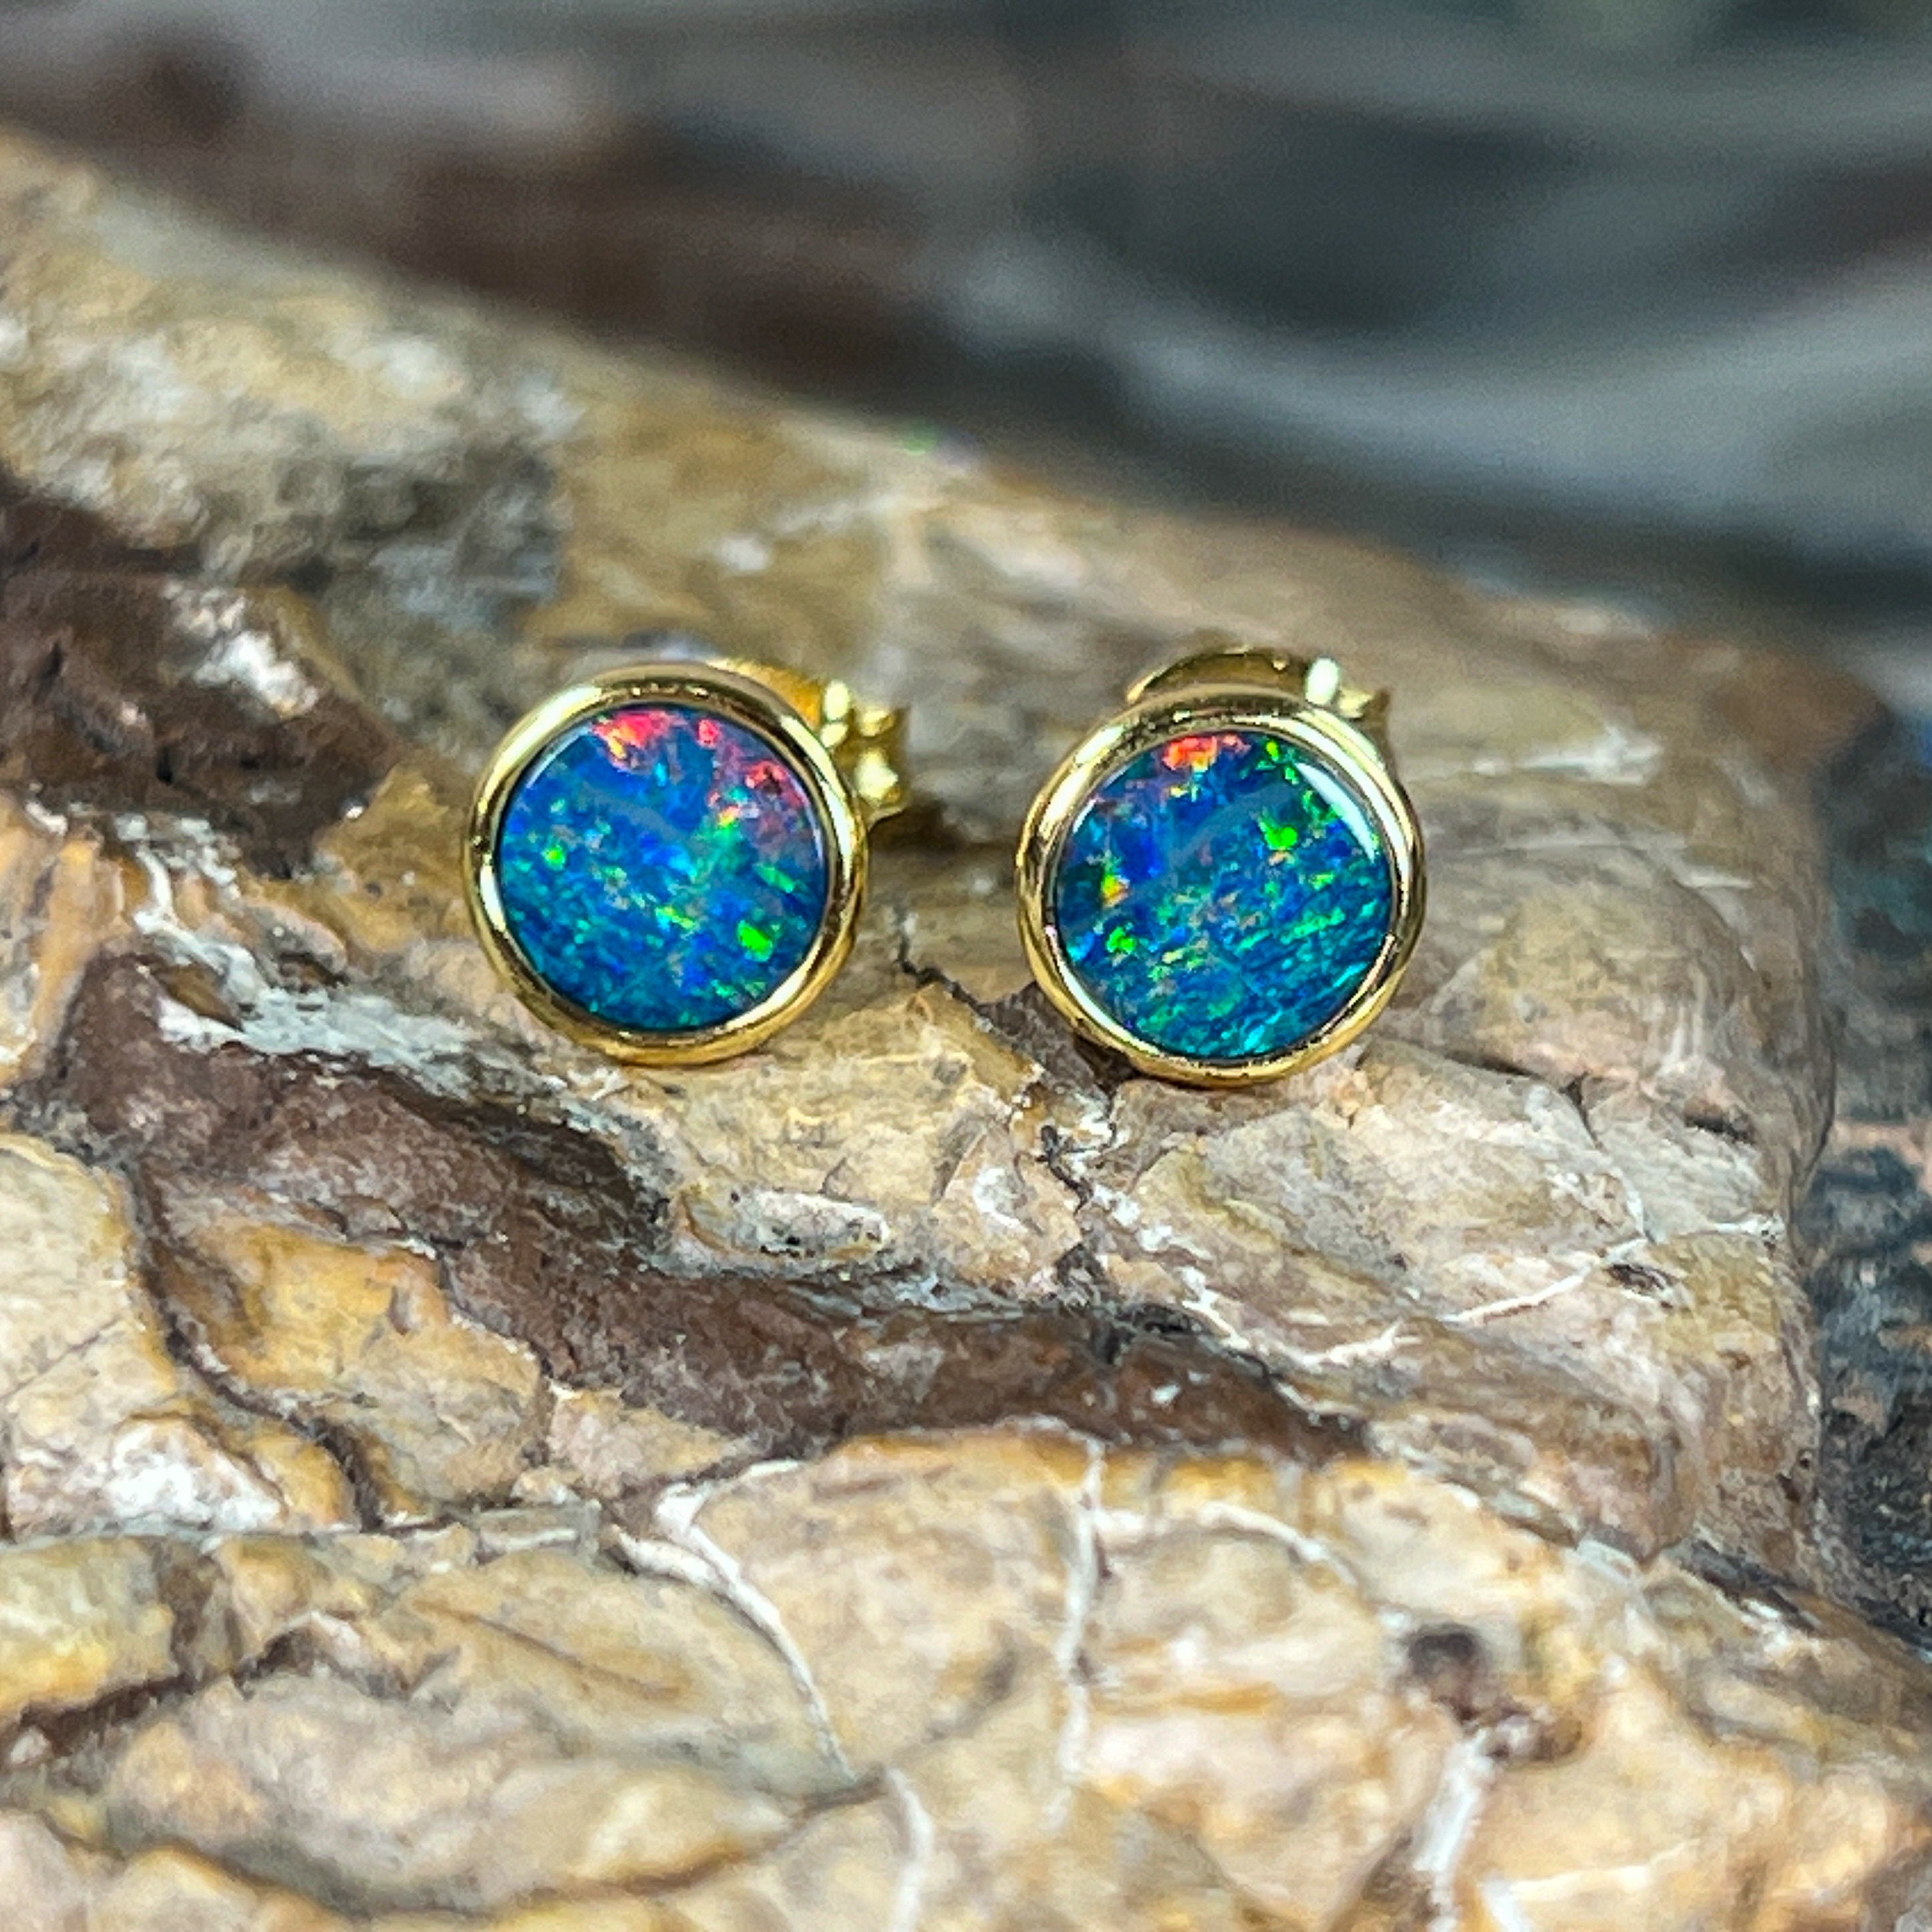 Pair of Gold plated sterling silver 6.5mm Round Opal doublets studs - Masterpiece Jewellery Opal & Gems Sydney Australia | Online Shop